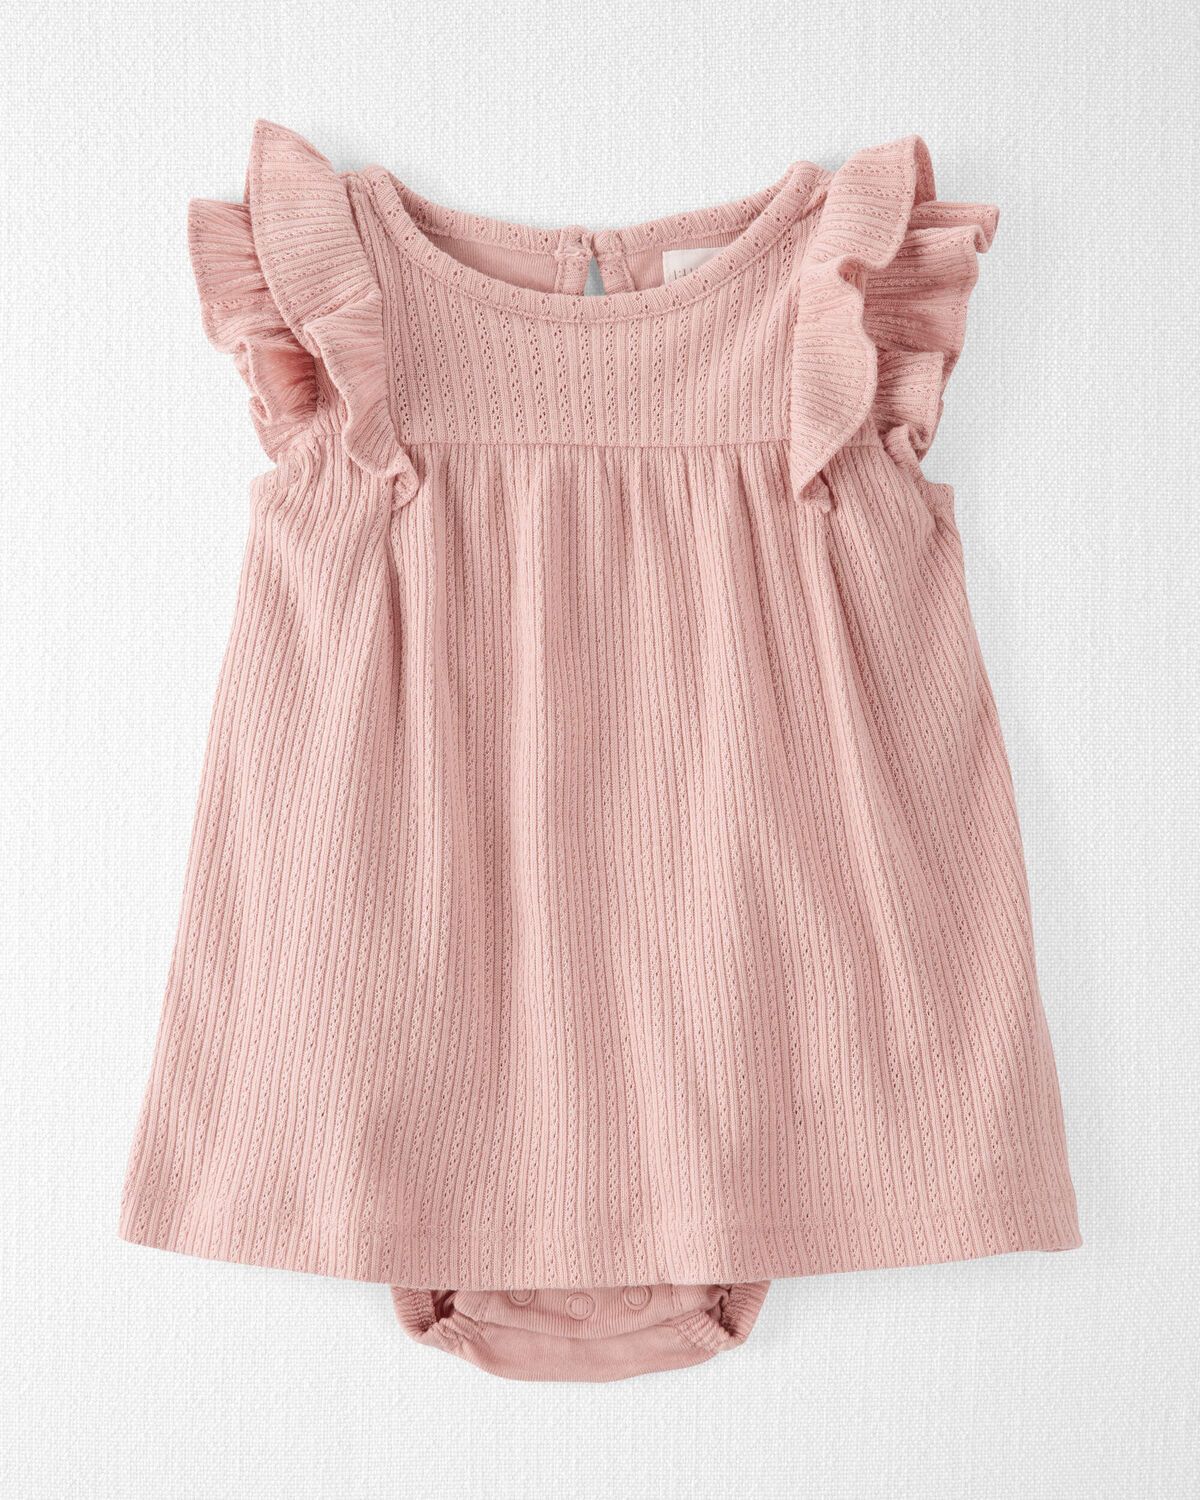 Blush Baby Pointelle-Knit Bodysuit Dress Made with Organic Cotton in Pink | carters.com | Carter's